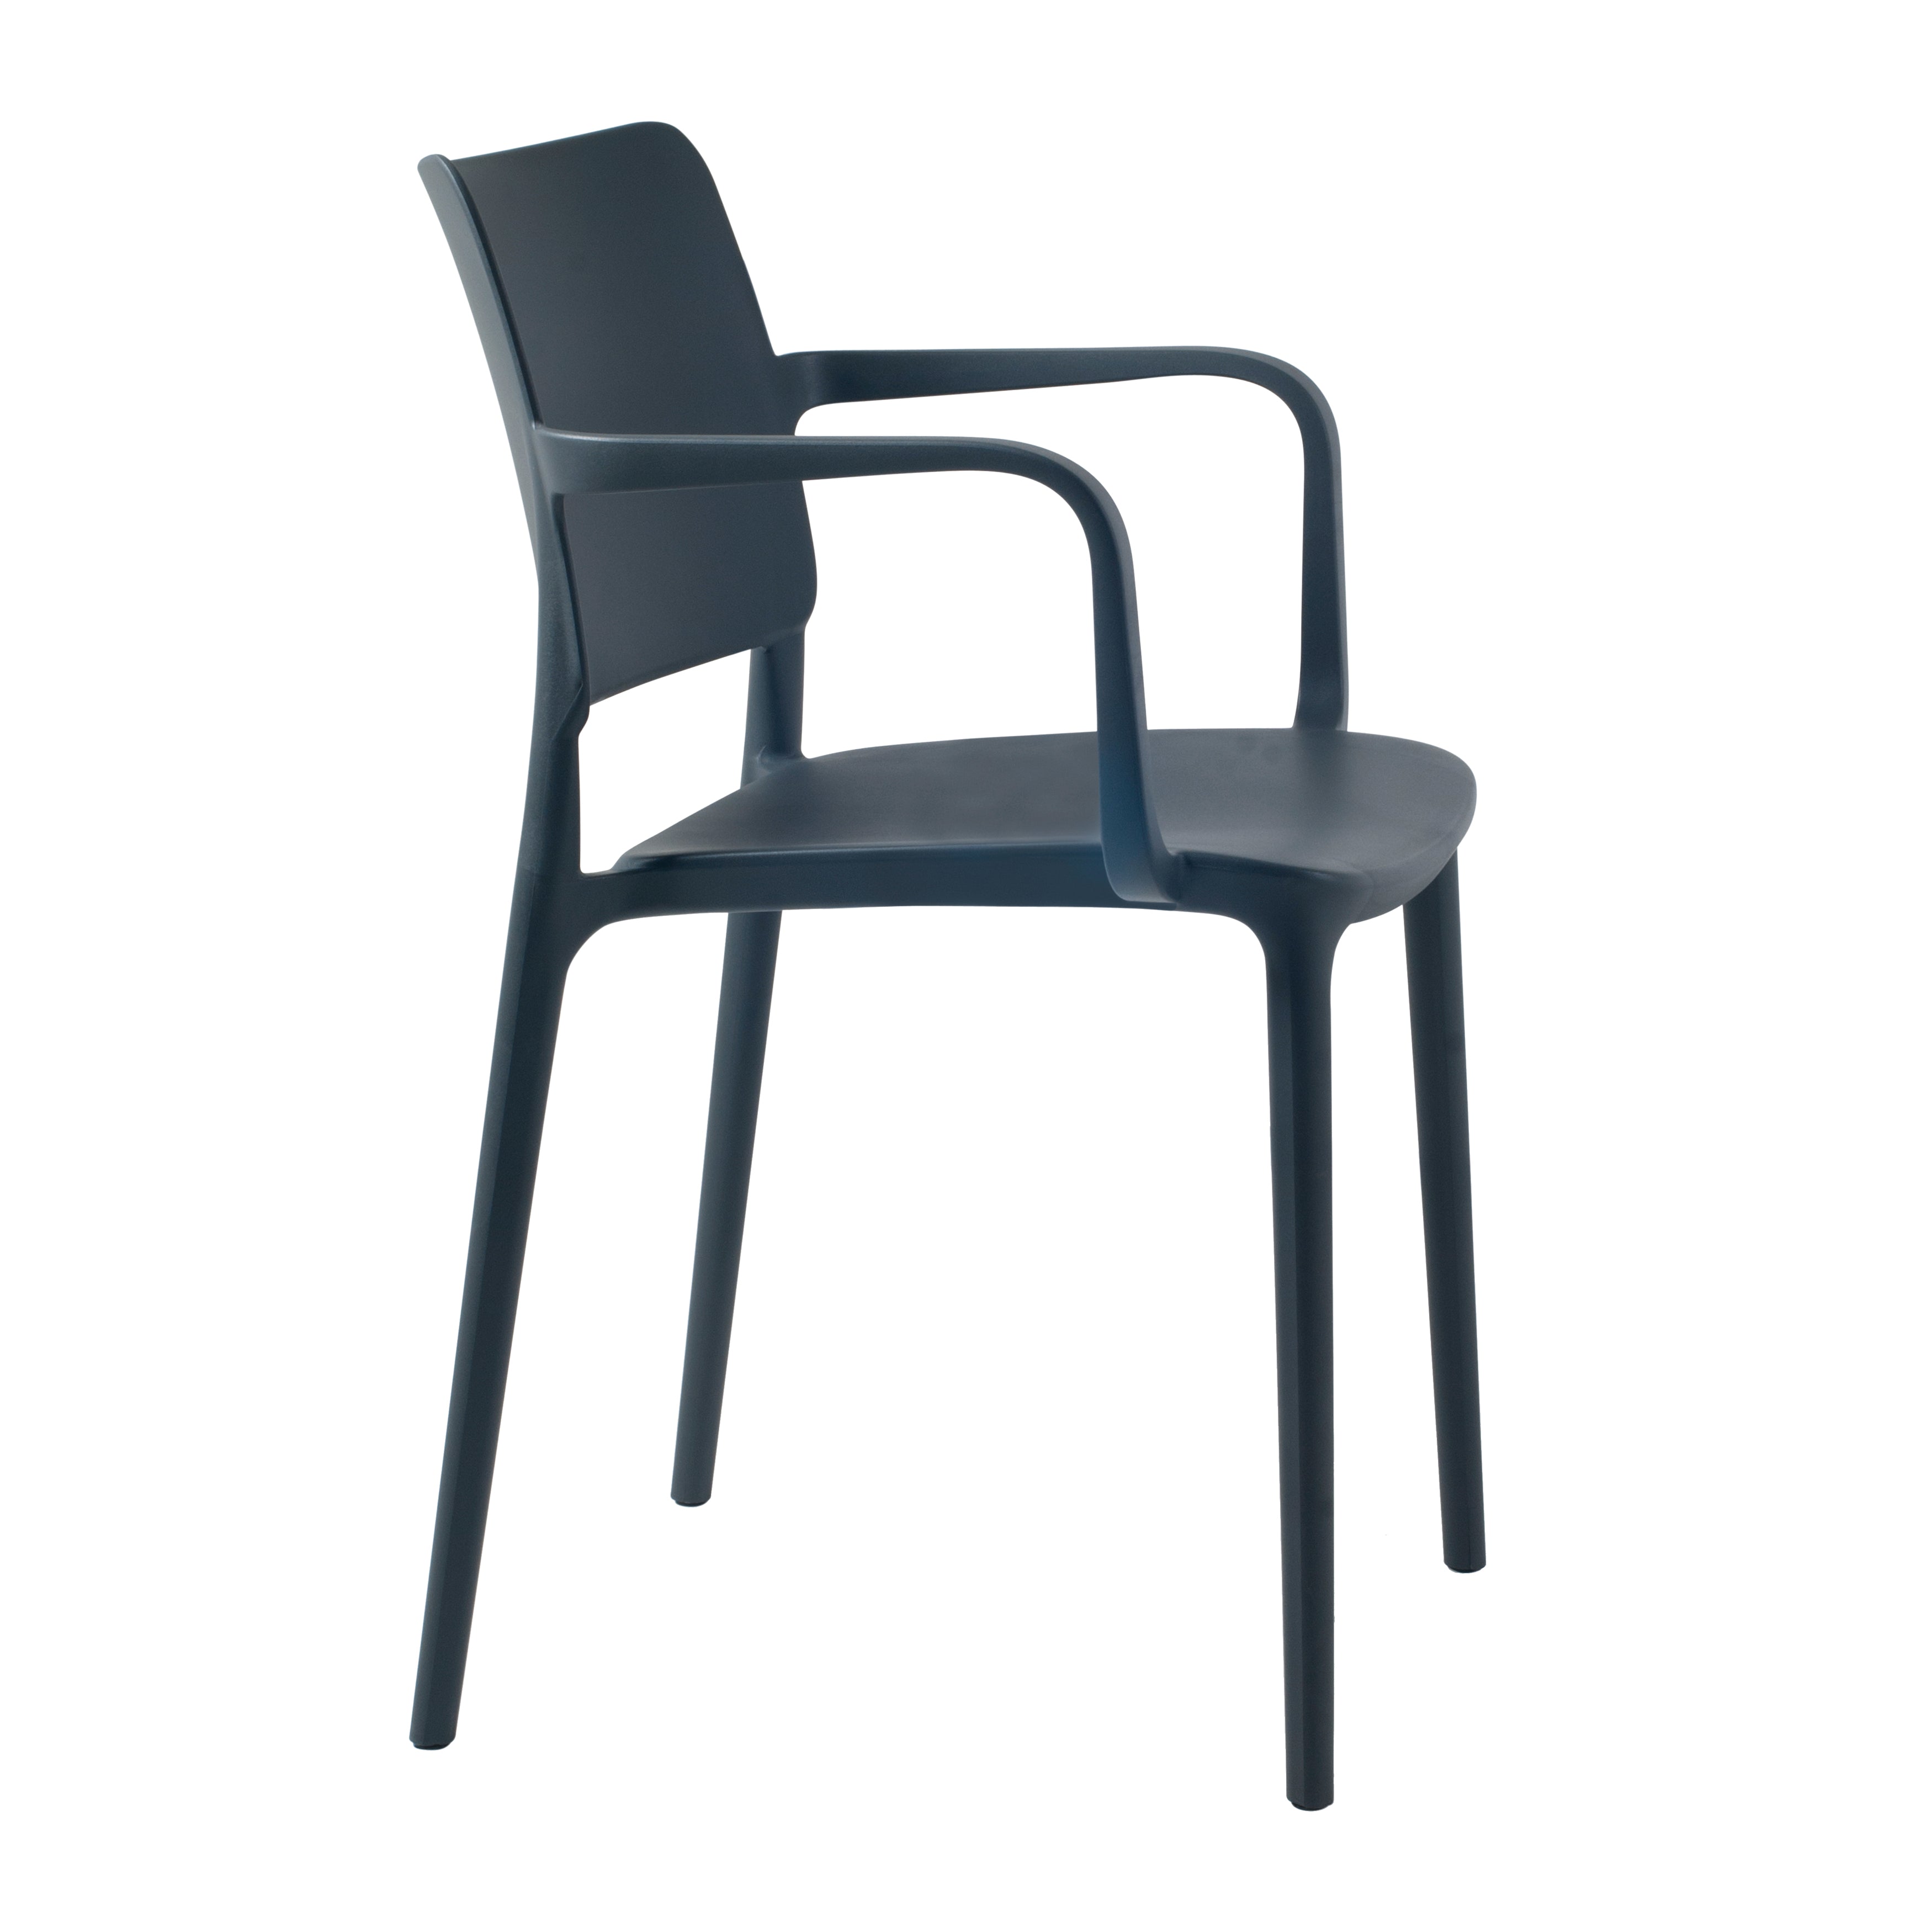 Cleo Arm Patio Dining Chair in Anthracite - (Set of 2)